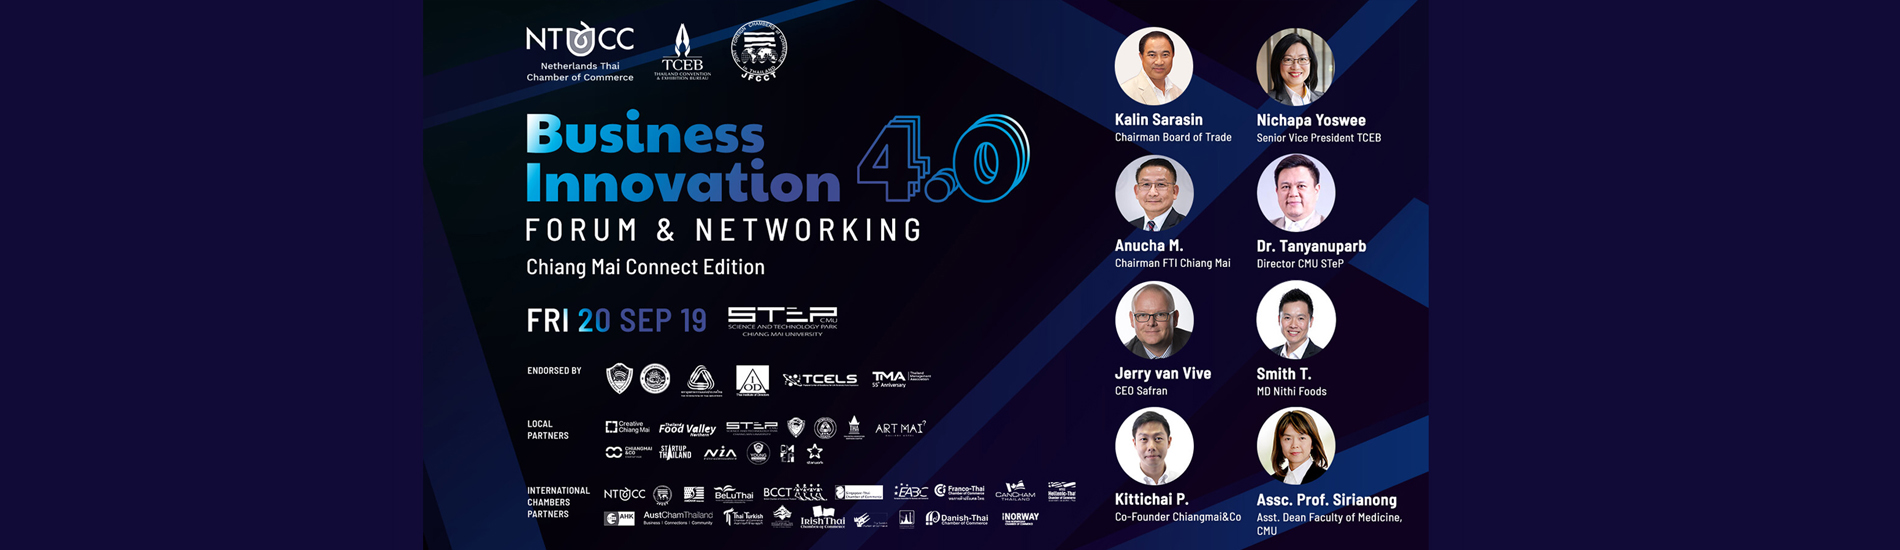 Business Innovation 4.0 Forum & Networking, Chiang Mai